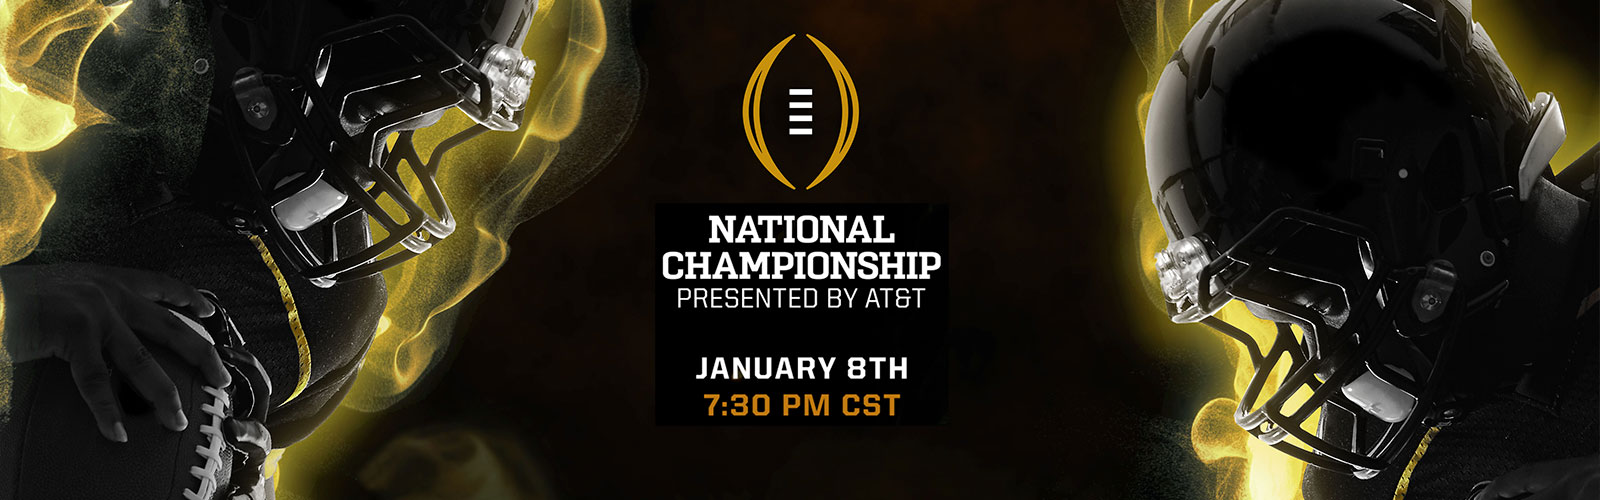 Background image for CFP National Championship 